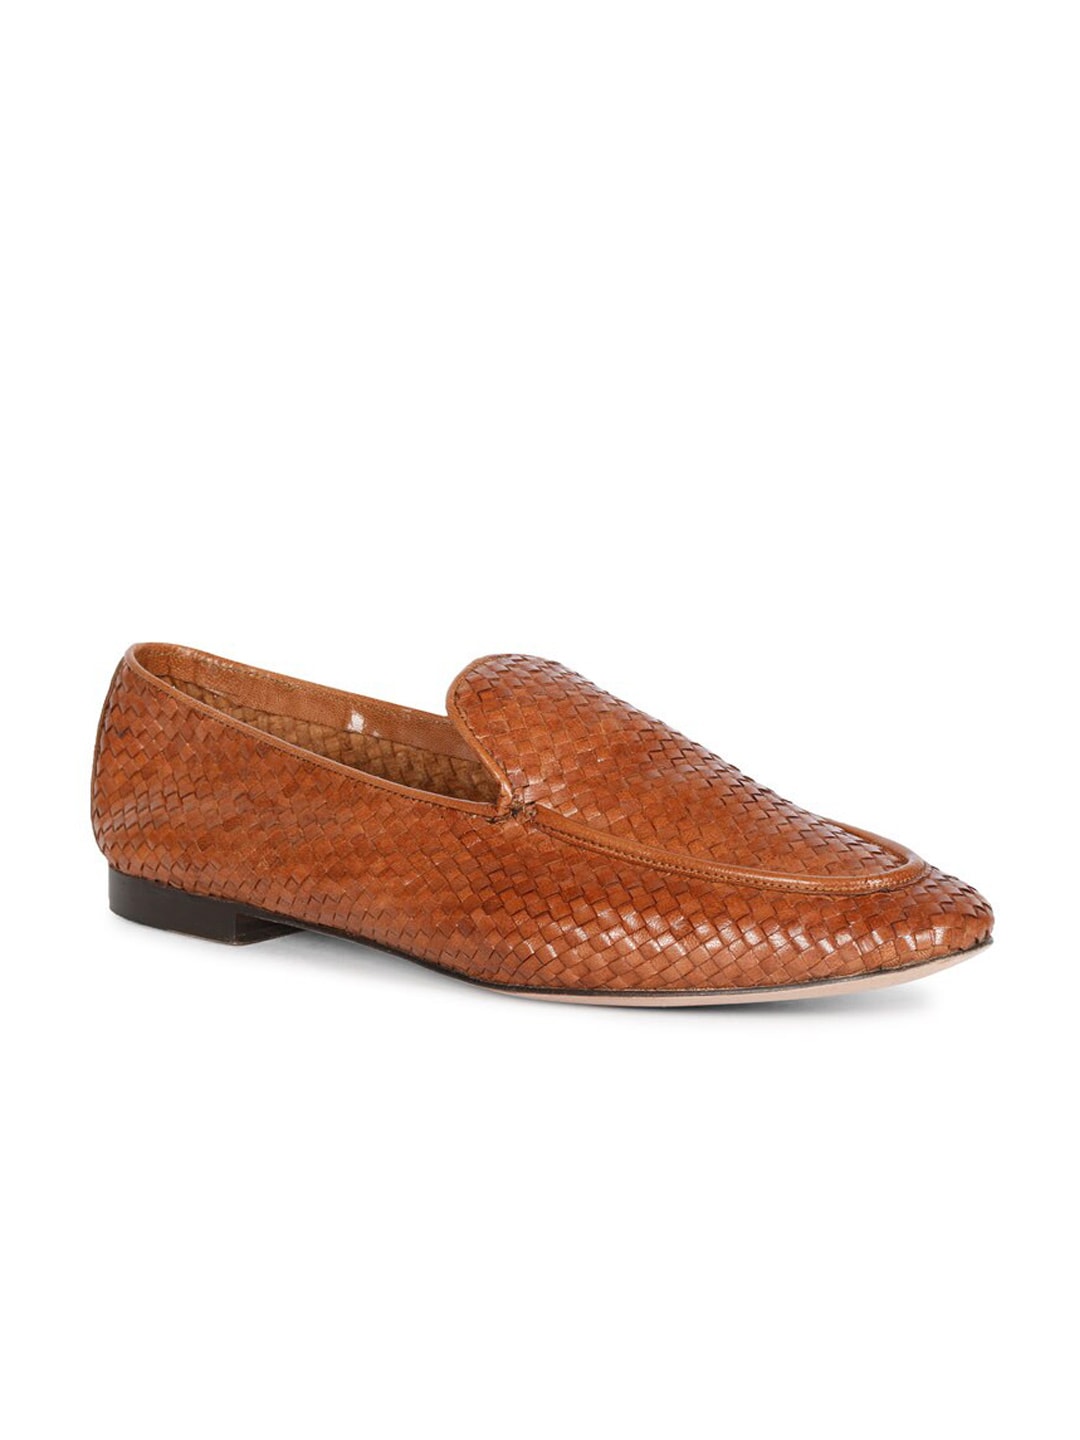 Saint G Women Textured Leather Loafers Price in India